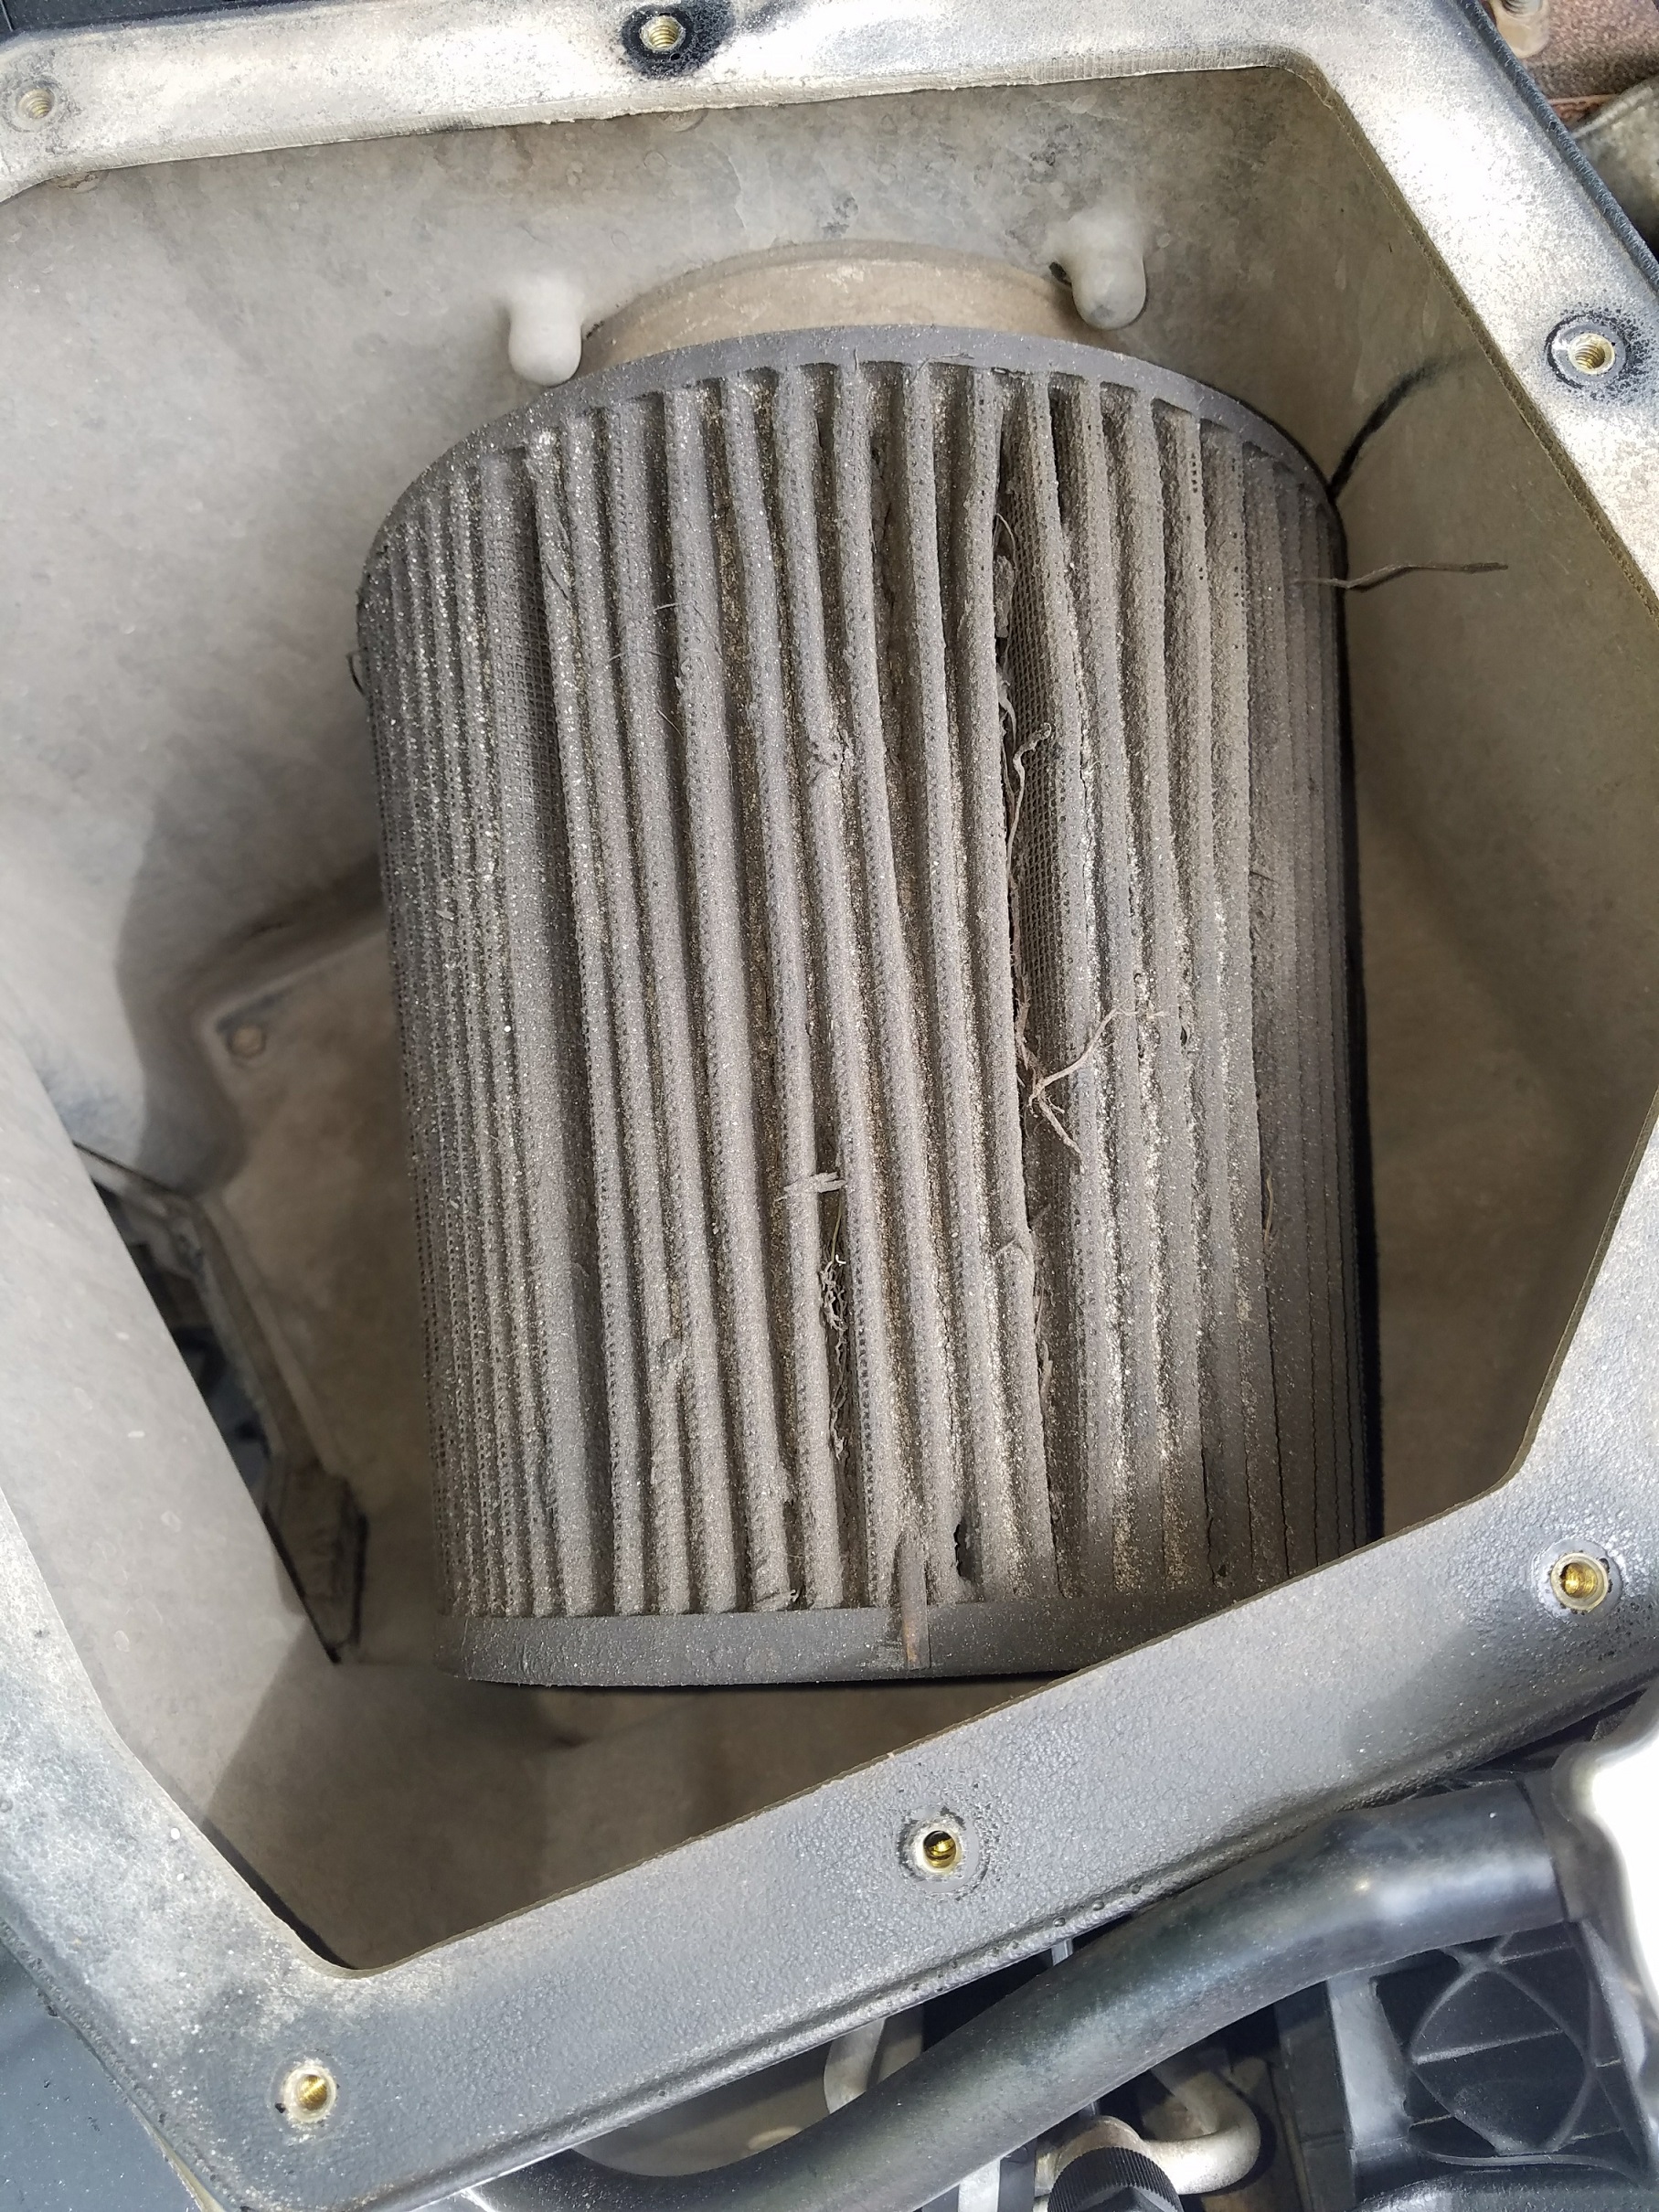 Air Filter.  Obviously never changed